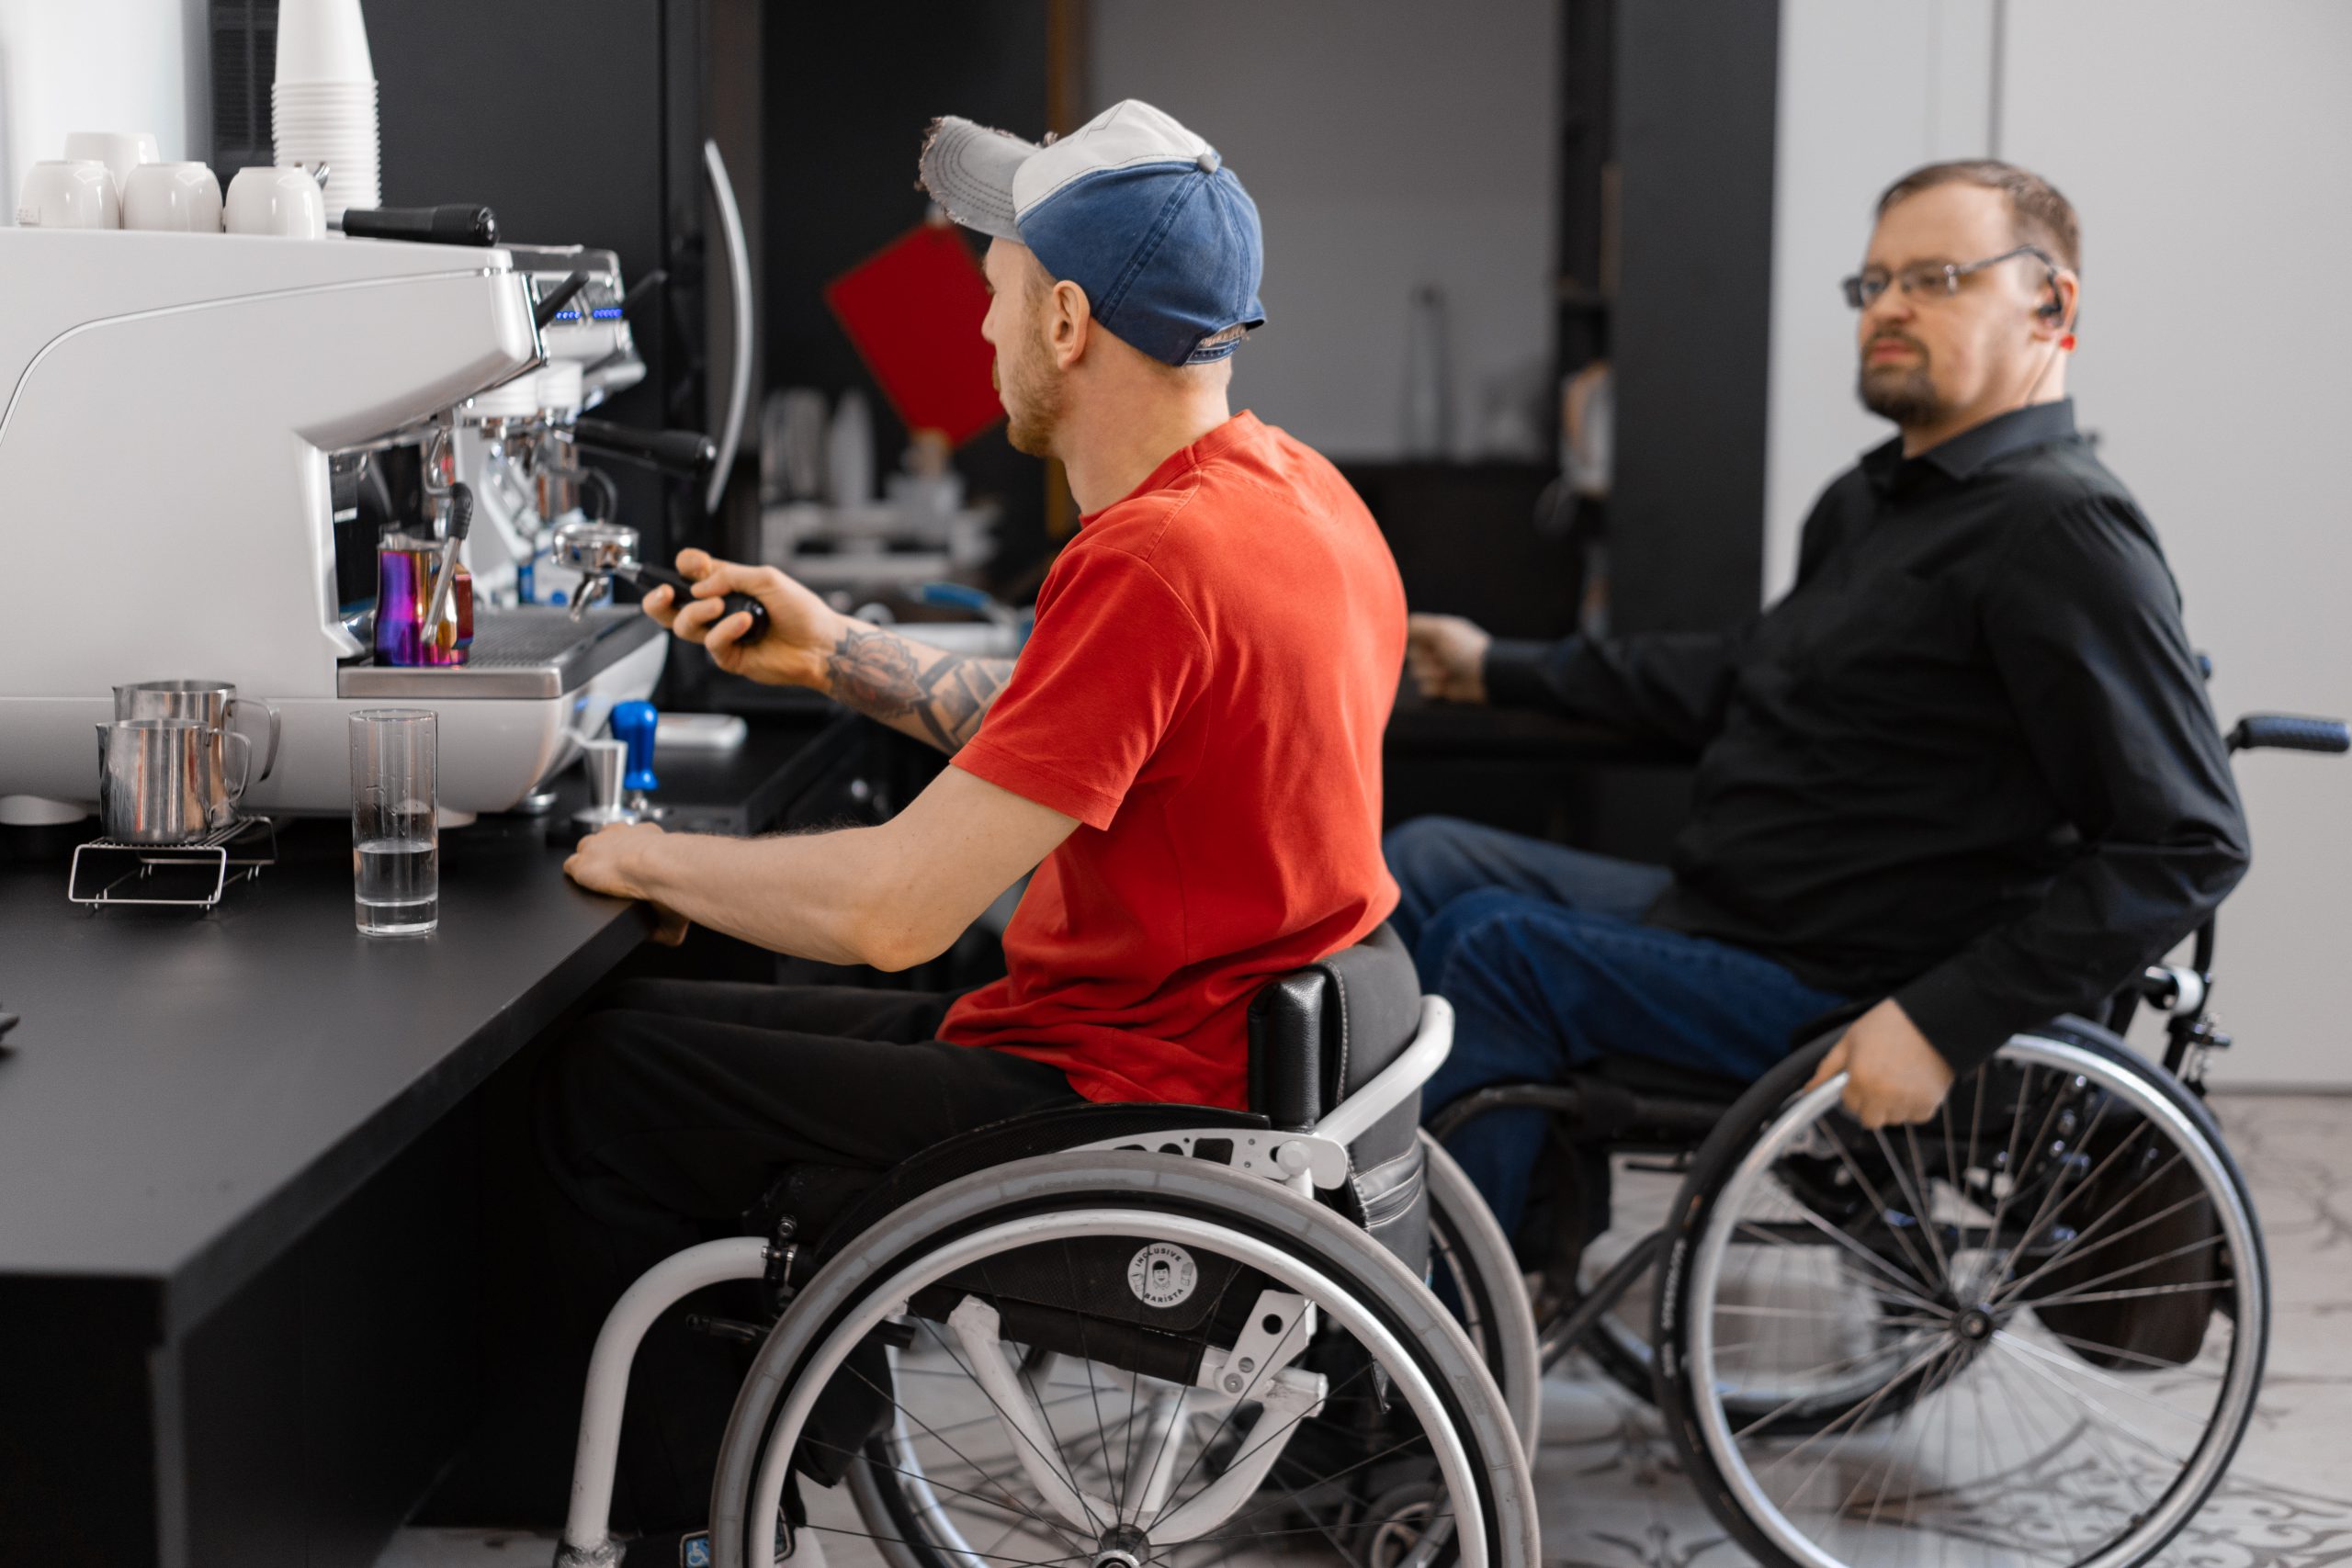 Making your workplace inclusive for employees with disabilities